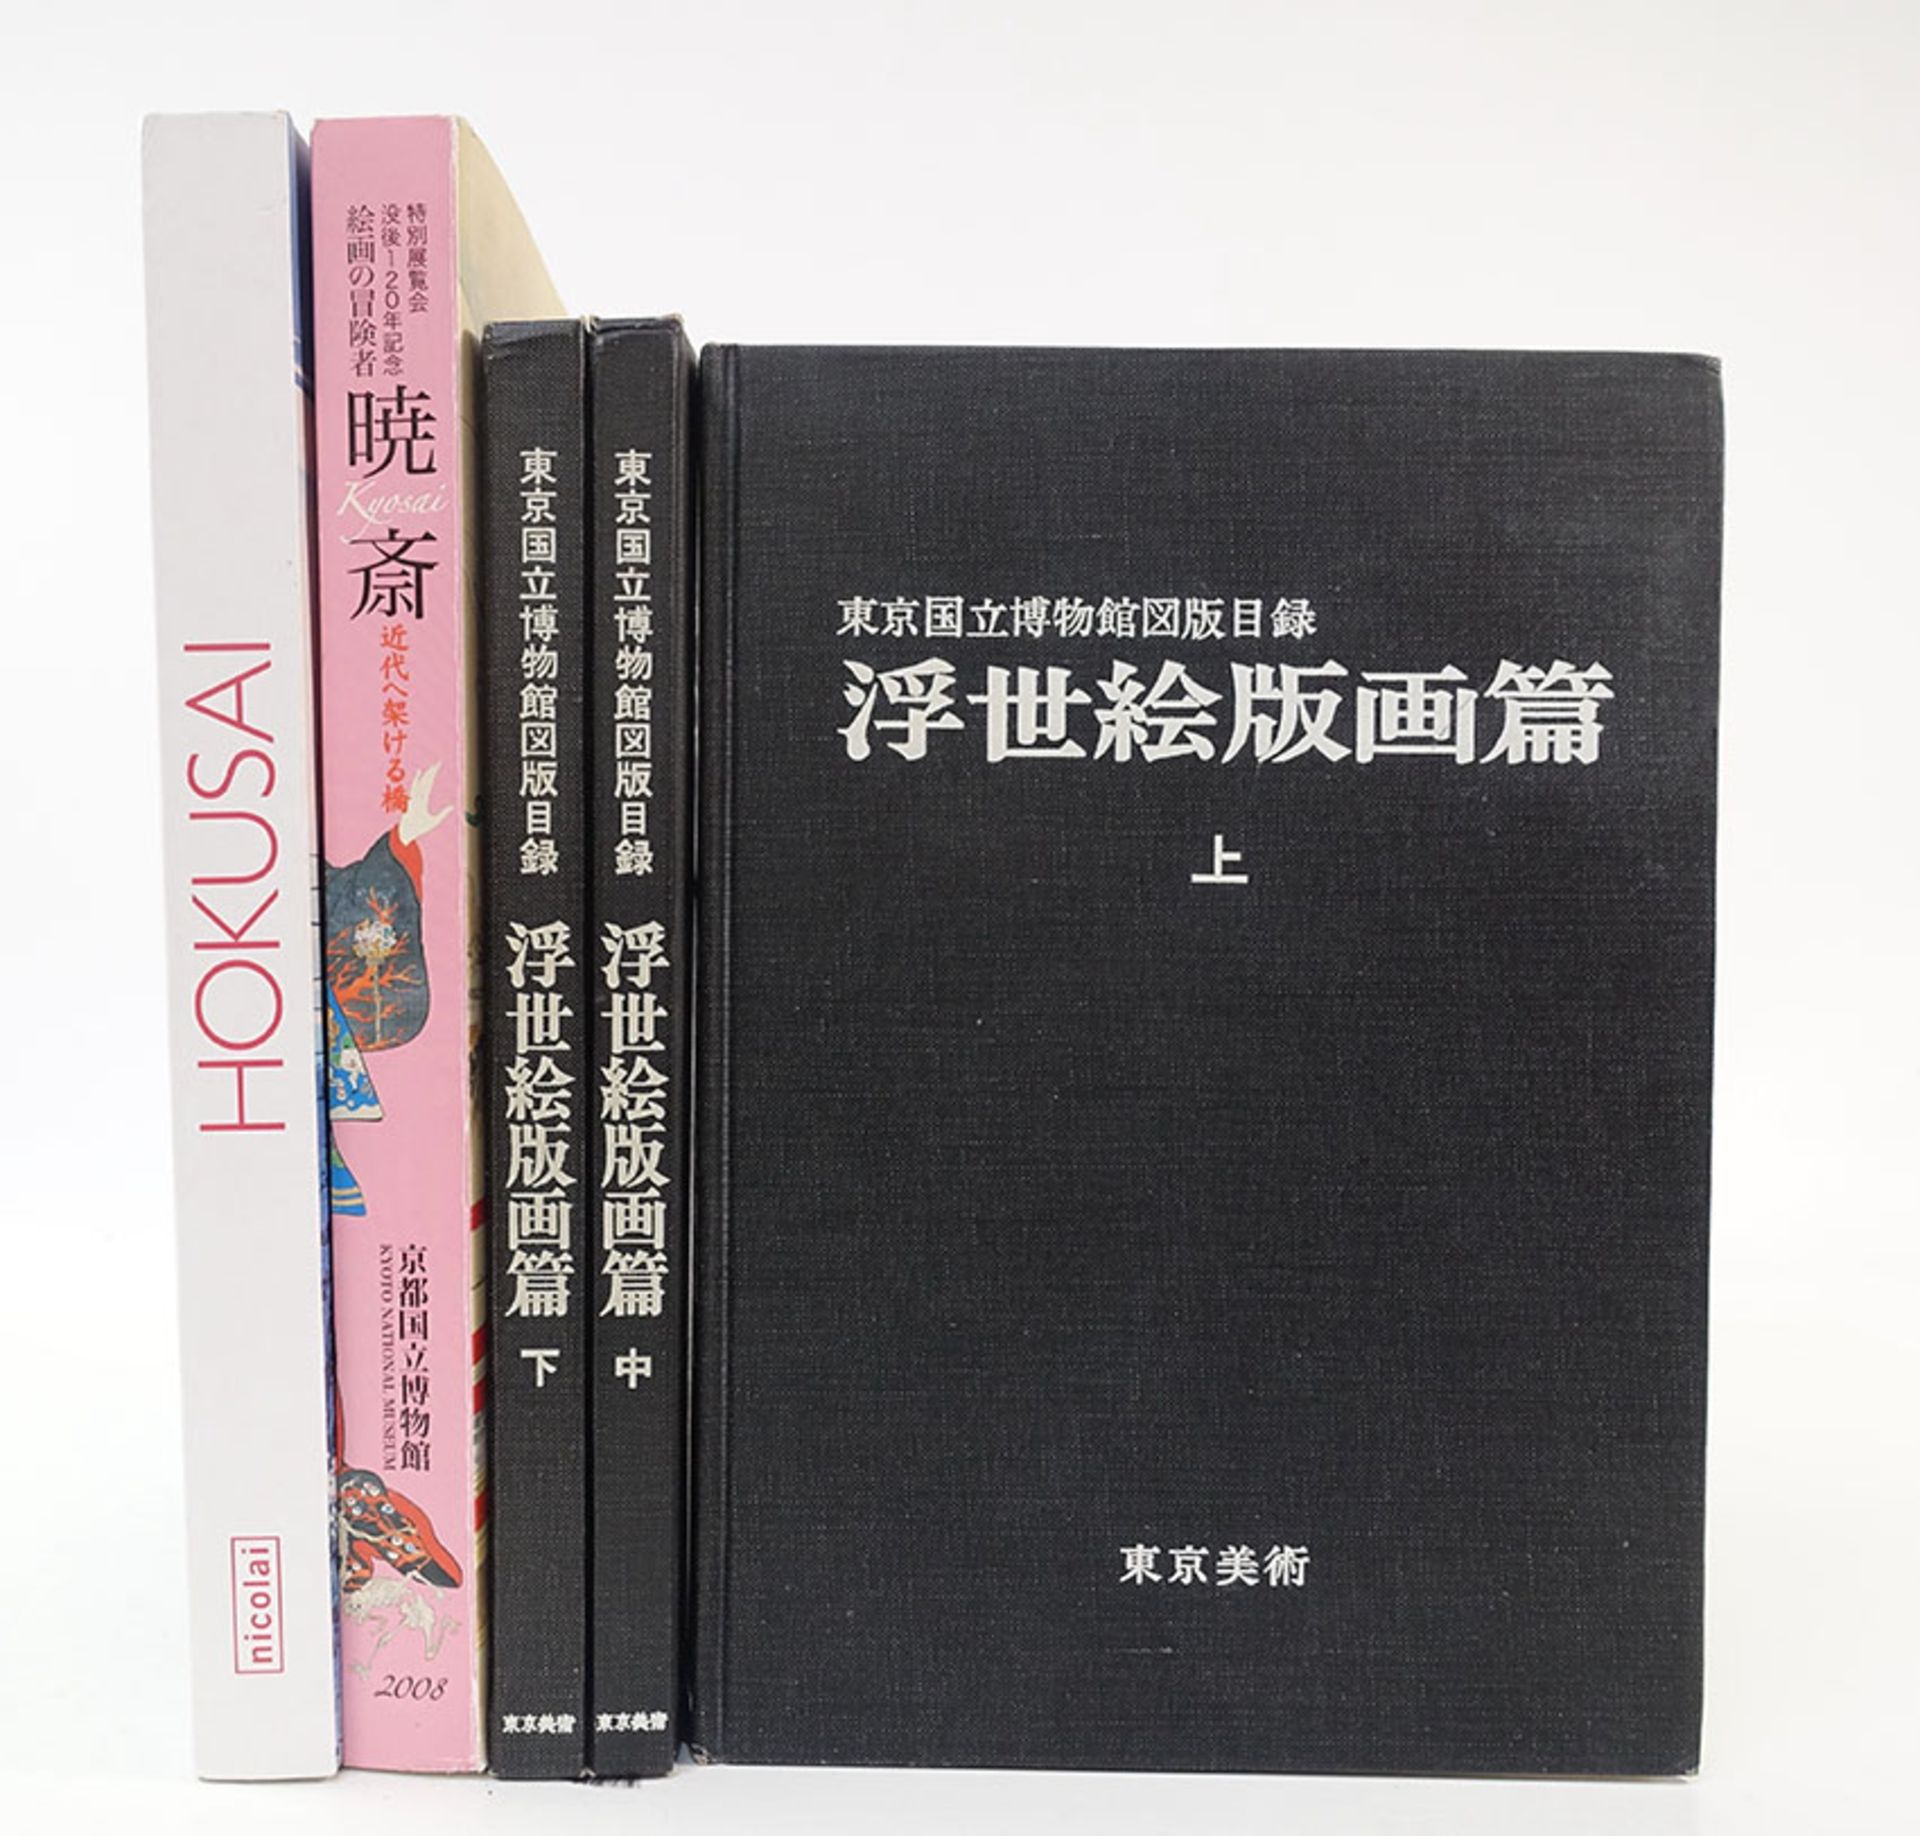 CHINA - JAPAN -- ILLUSTRATED CATALOGUES of Tokyo National Museum. Ukiyo-e prints. (Text in